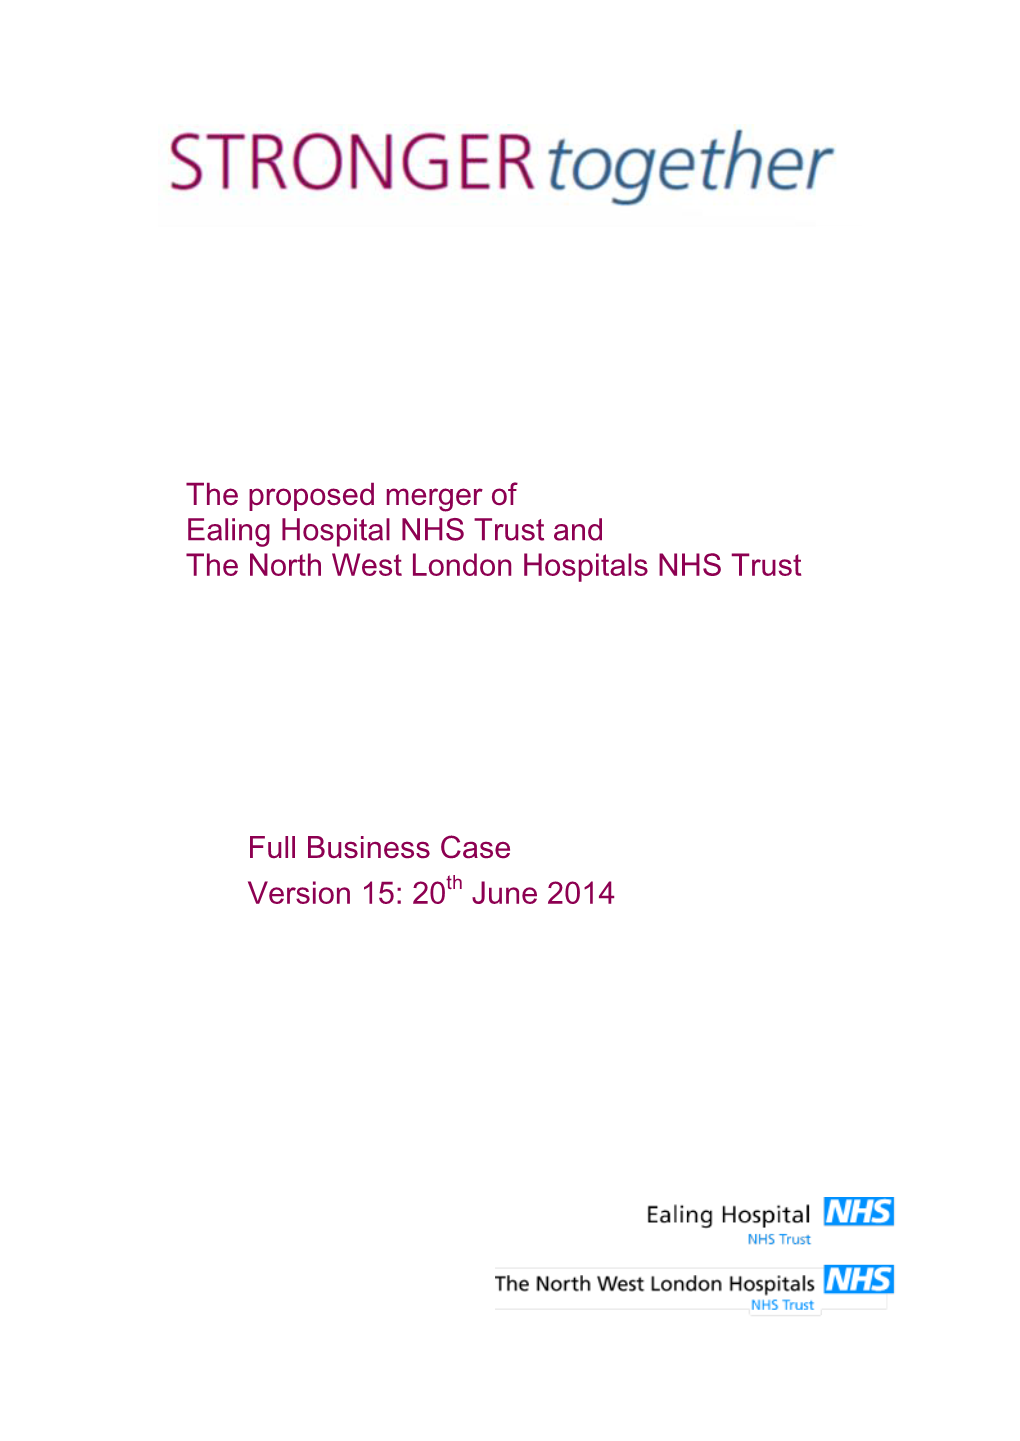 The Proposed Merger of Ealing Hospital NHS Trust and the North West London Hospitals NHS Trust Full Business Case Version 15